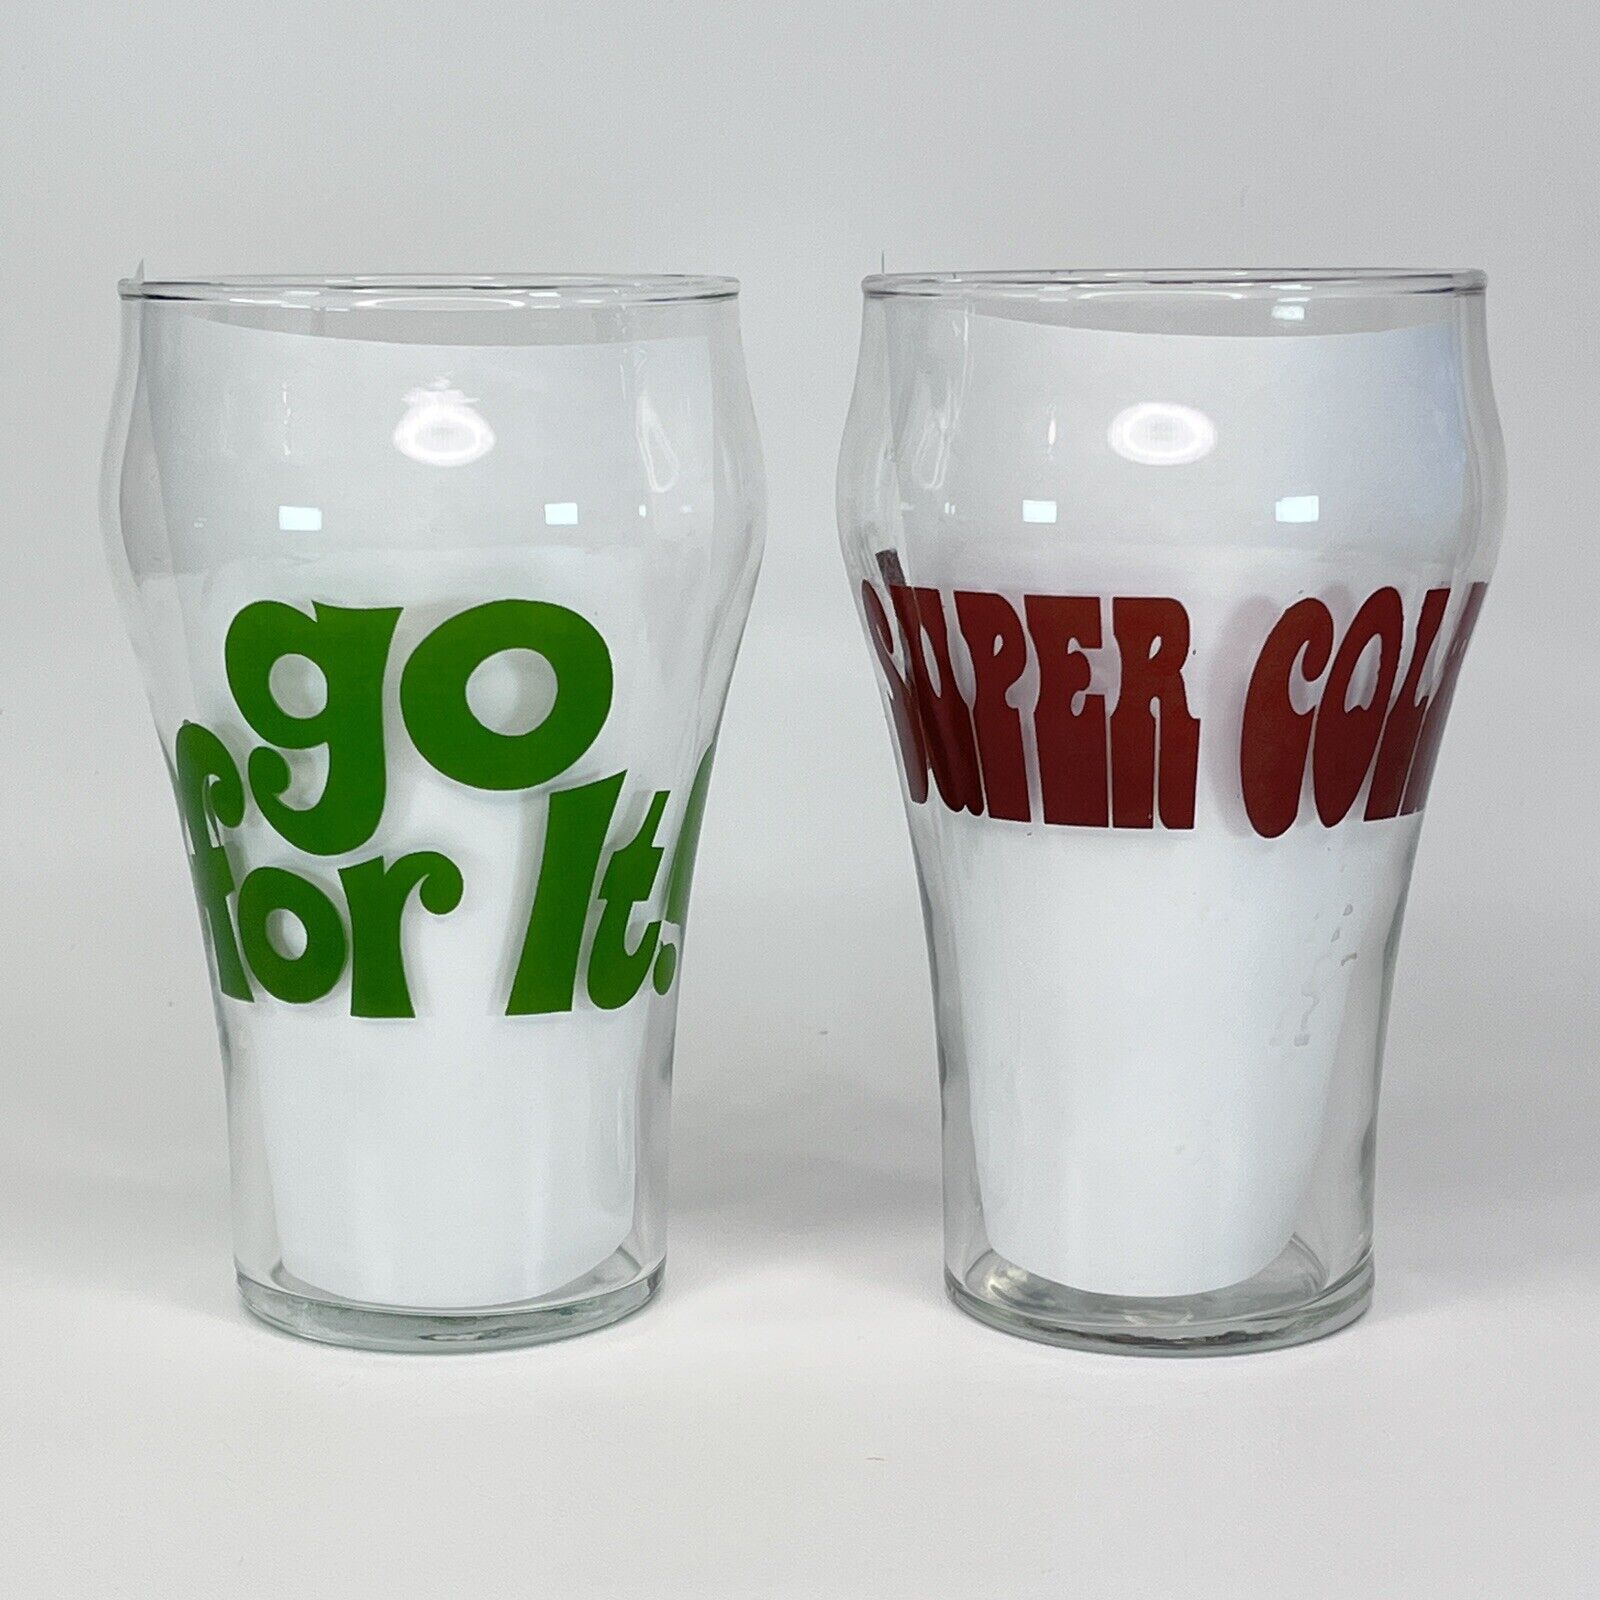 2x Vintage 1970s “Super Cola” “Go For It” 32 Ounce Tumbler Glass Cup